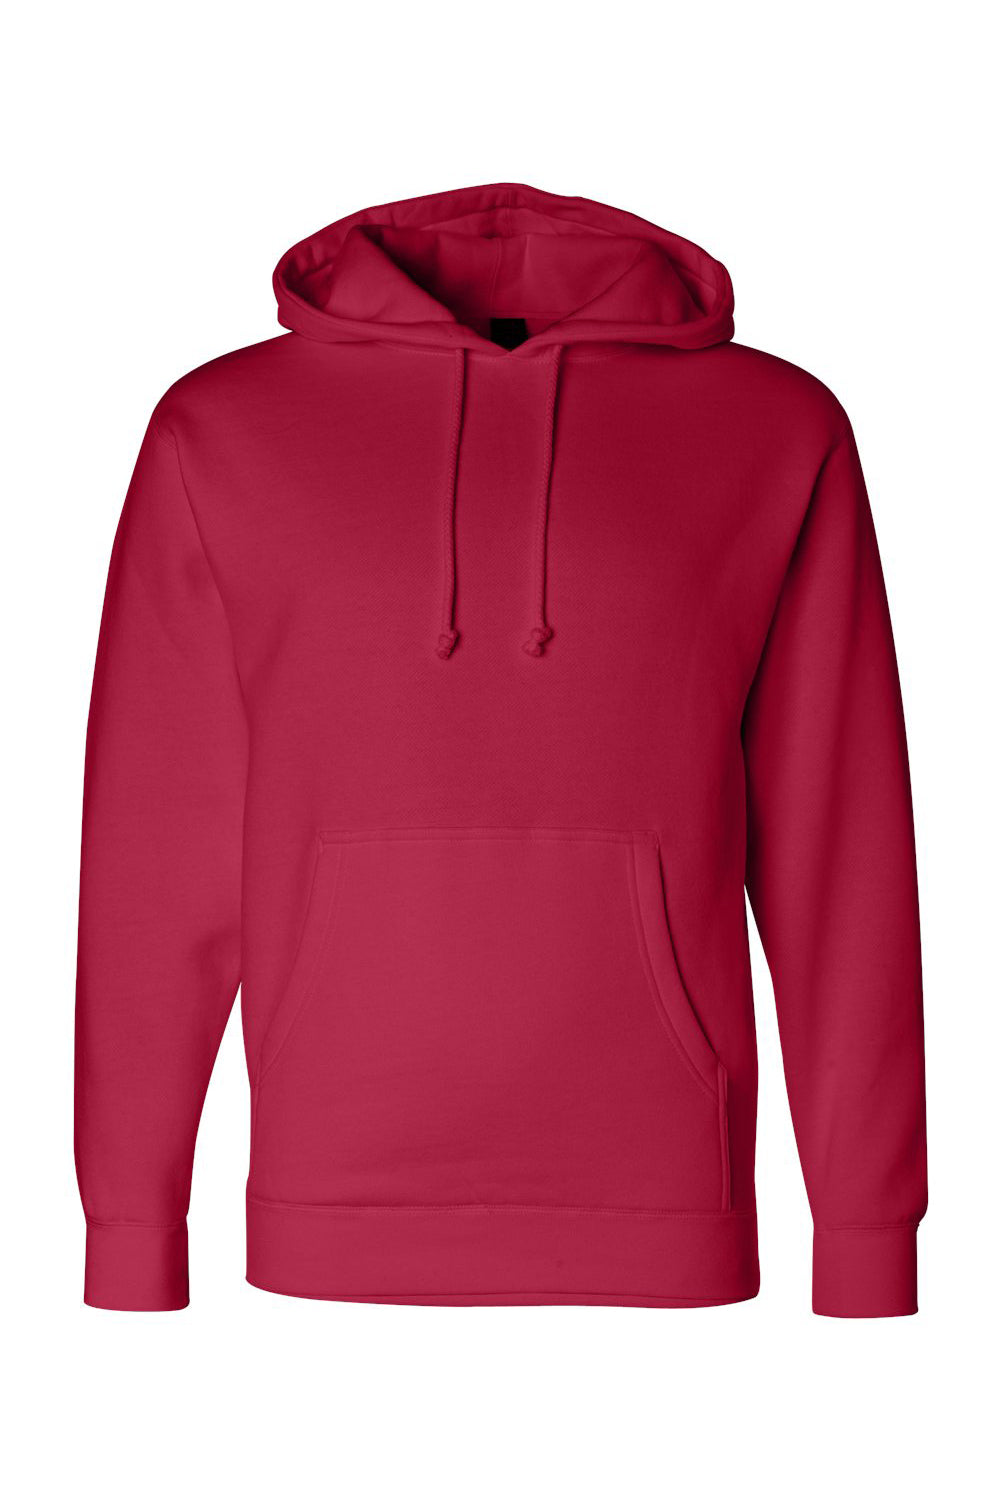 Independent Trading Co. IND4000 Mens Hooded Sweatshirt Hoodie Red Flat Front